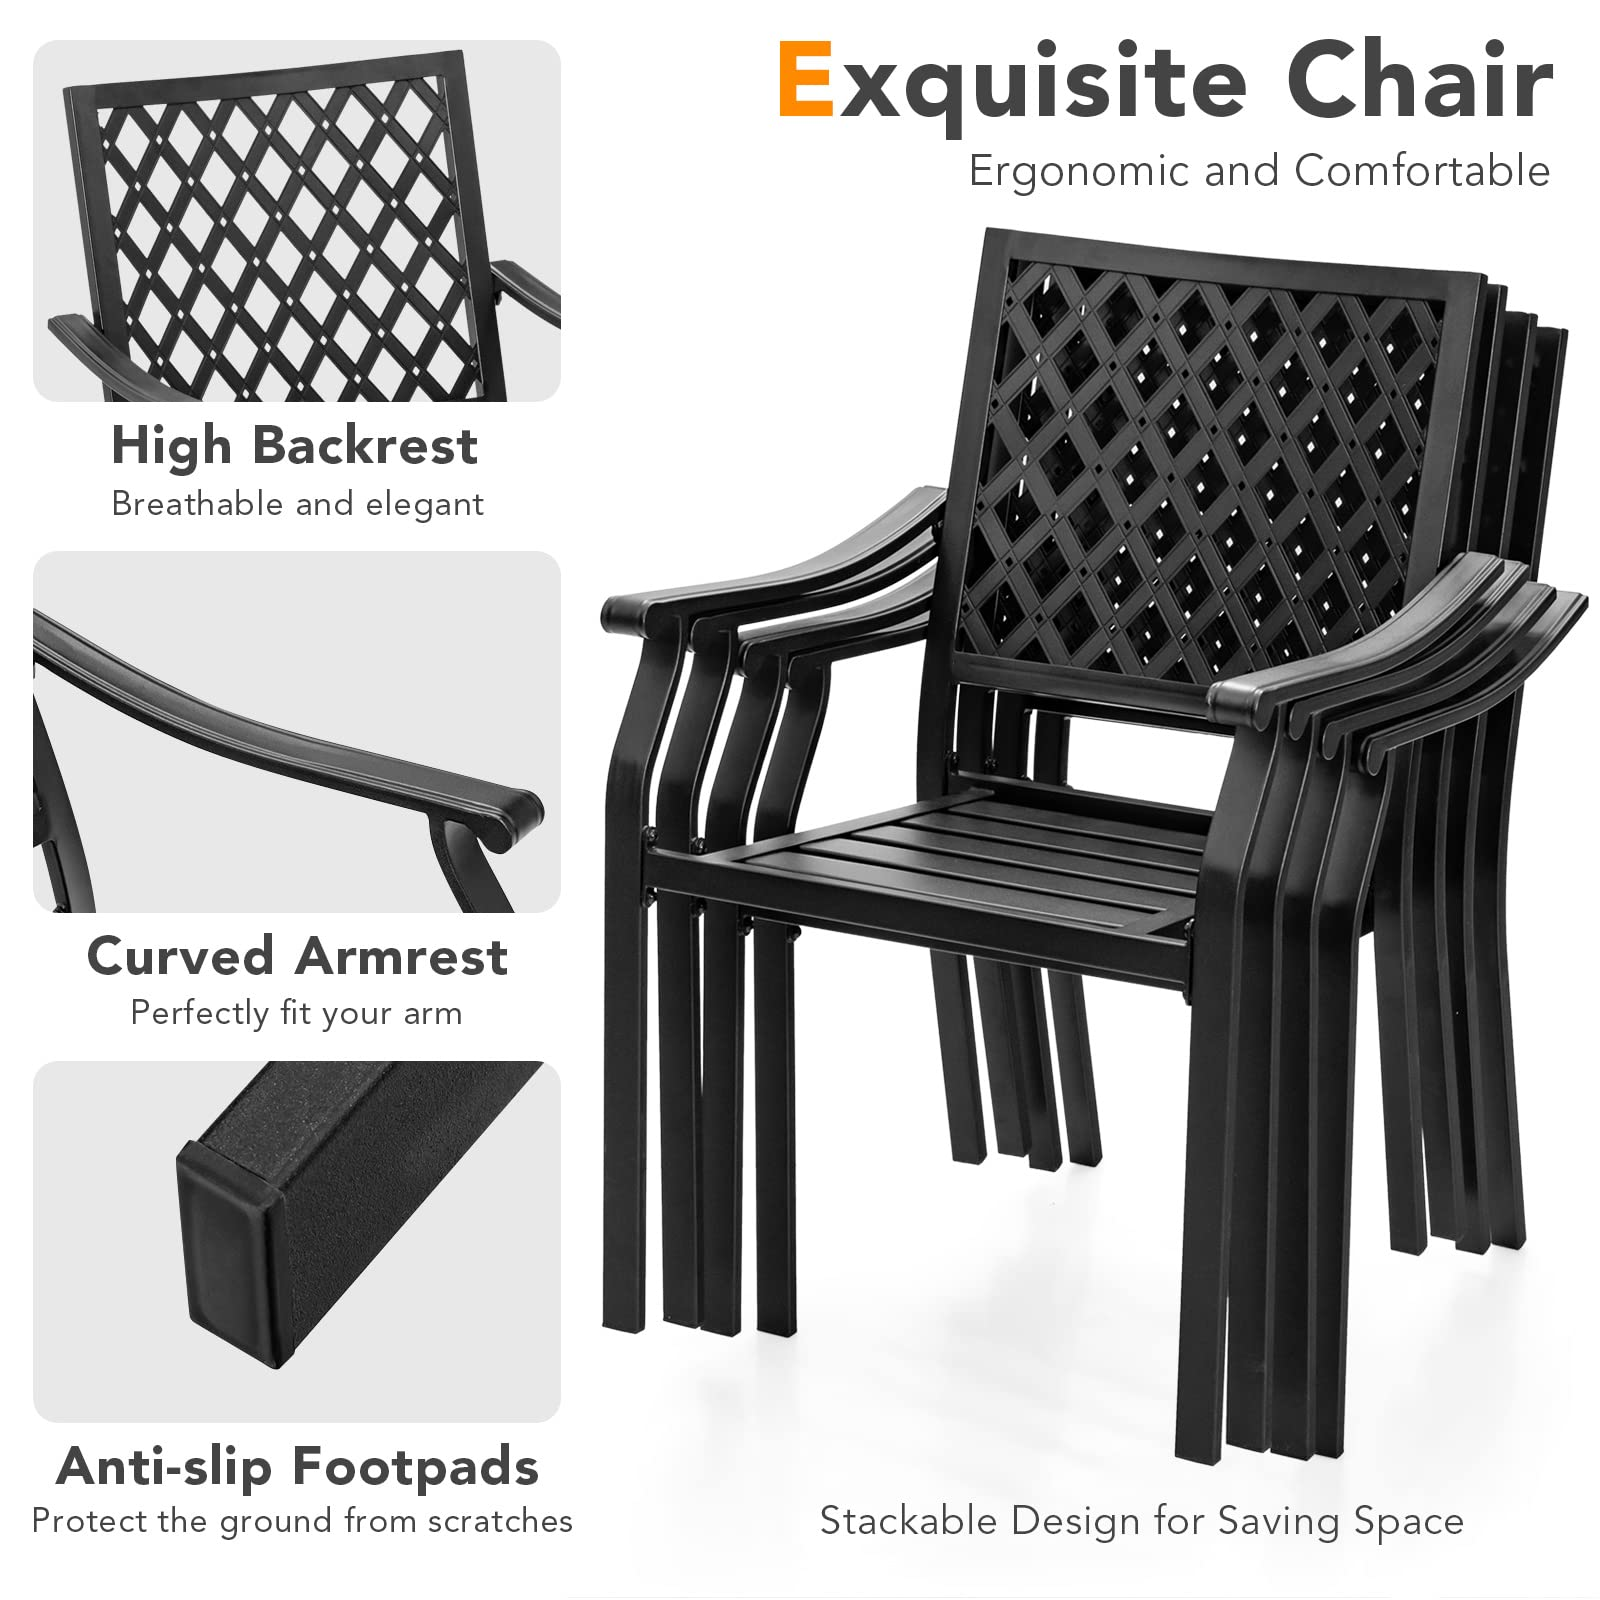 Giantex Patio Dining Chairs, Outdoor Stackable Metal Chair